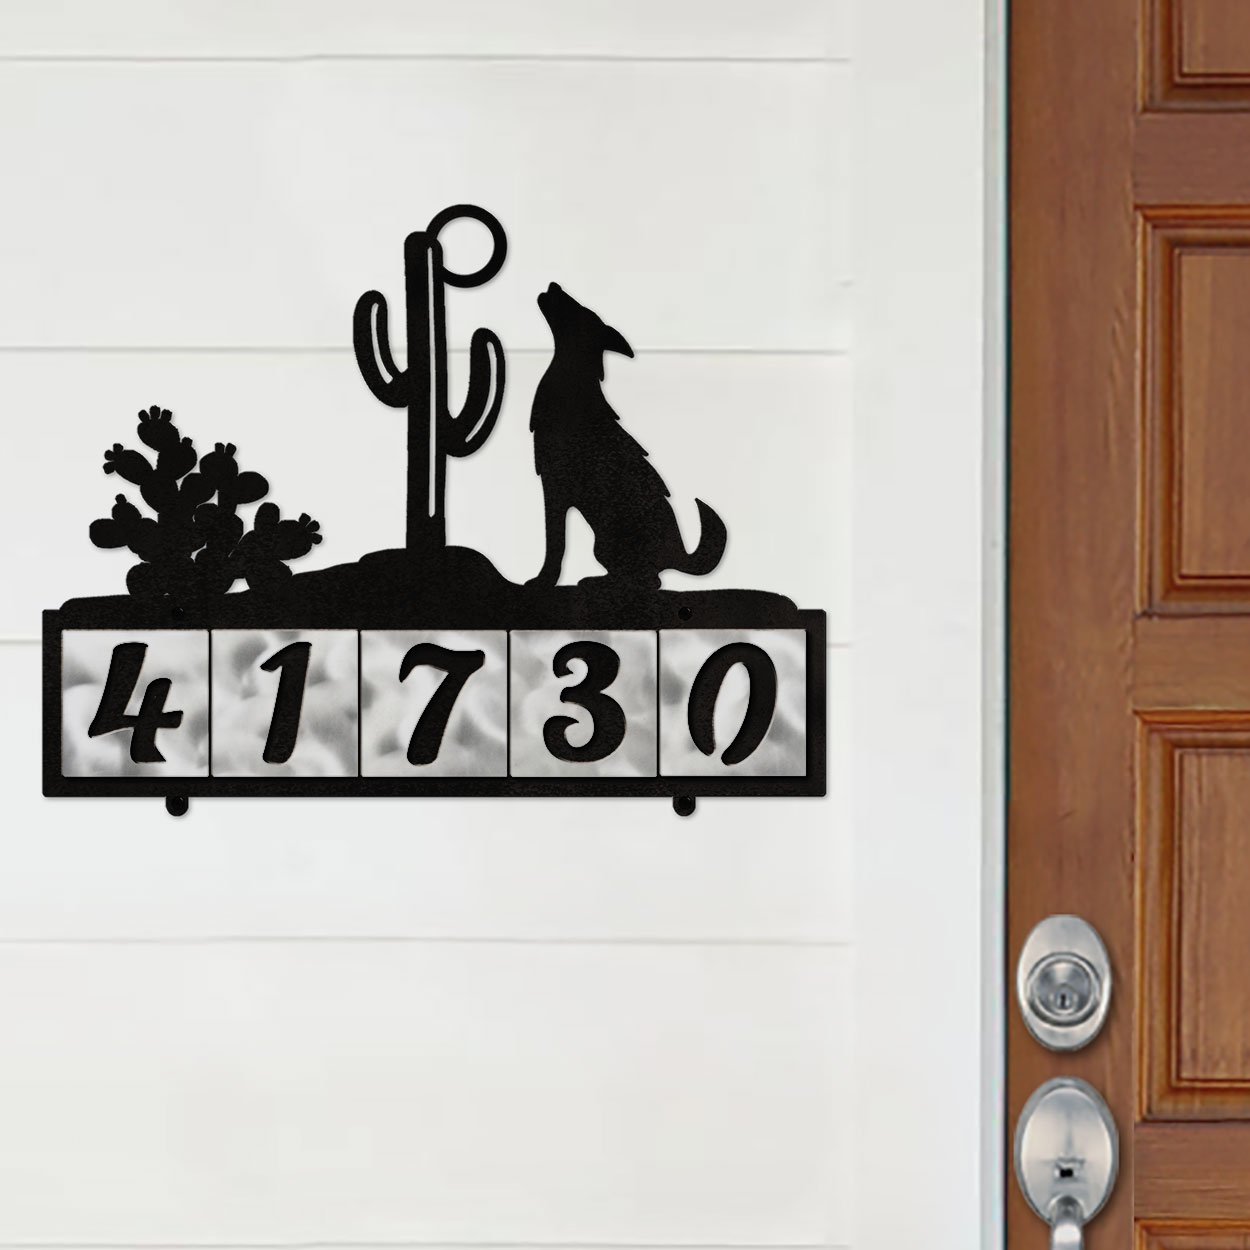 609085 - XL Howling Coyote Design 5-Digit Horizontal 6in Tile Outdoor House Numbers